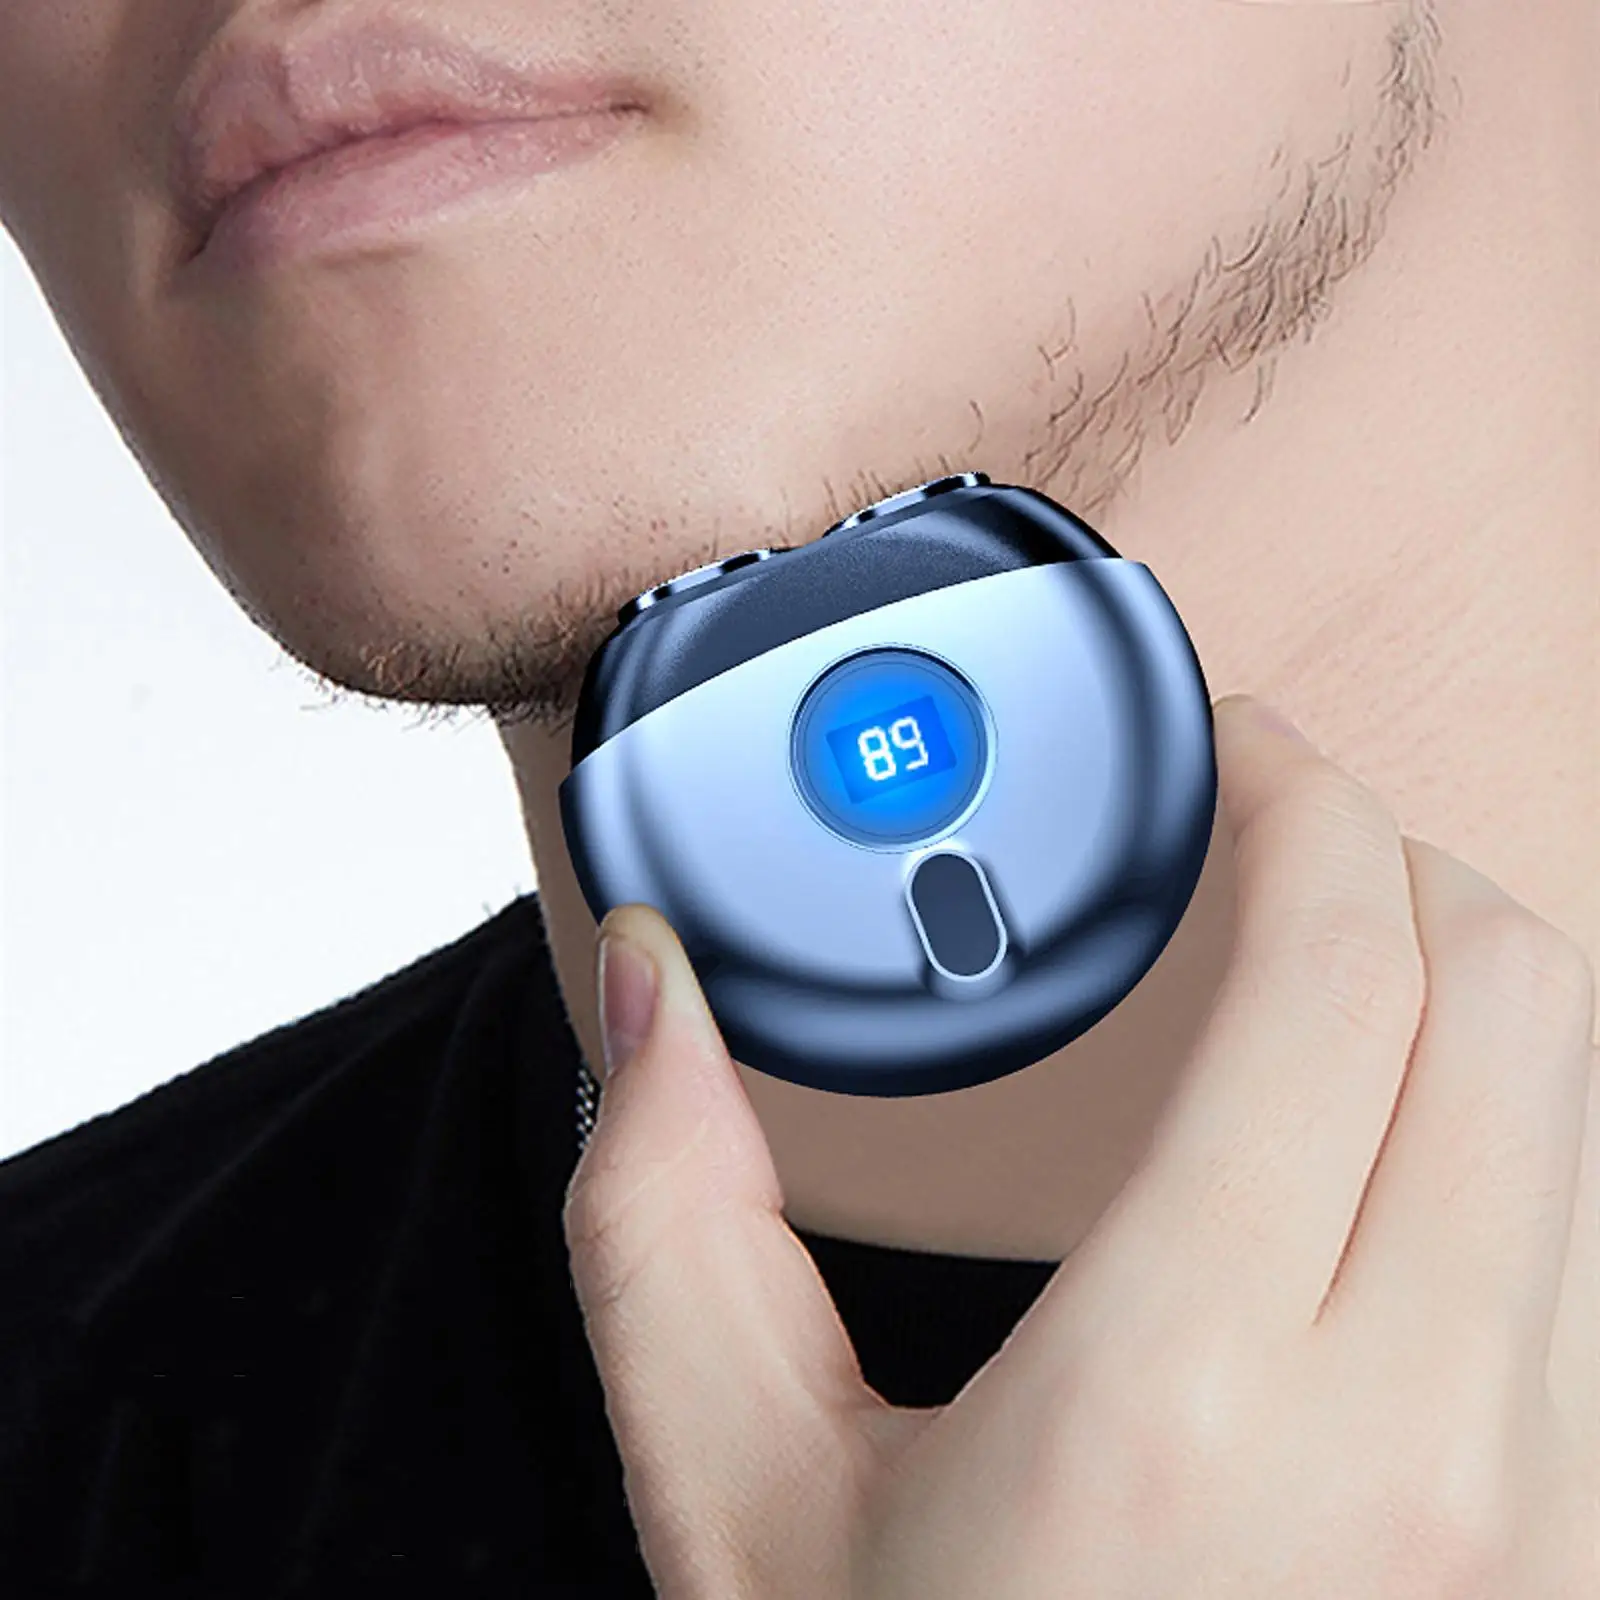 Electric Shaver LED Indicator Detachable Head USB Rechargeable Hair Removal Shaving Machine Use for Women Men